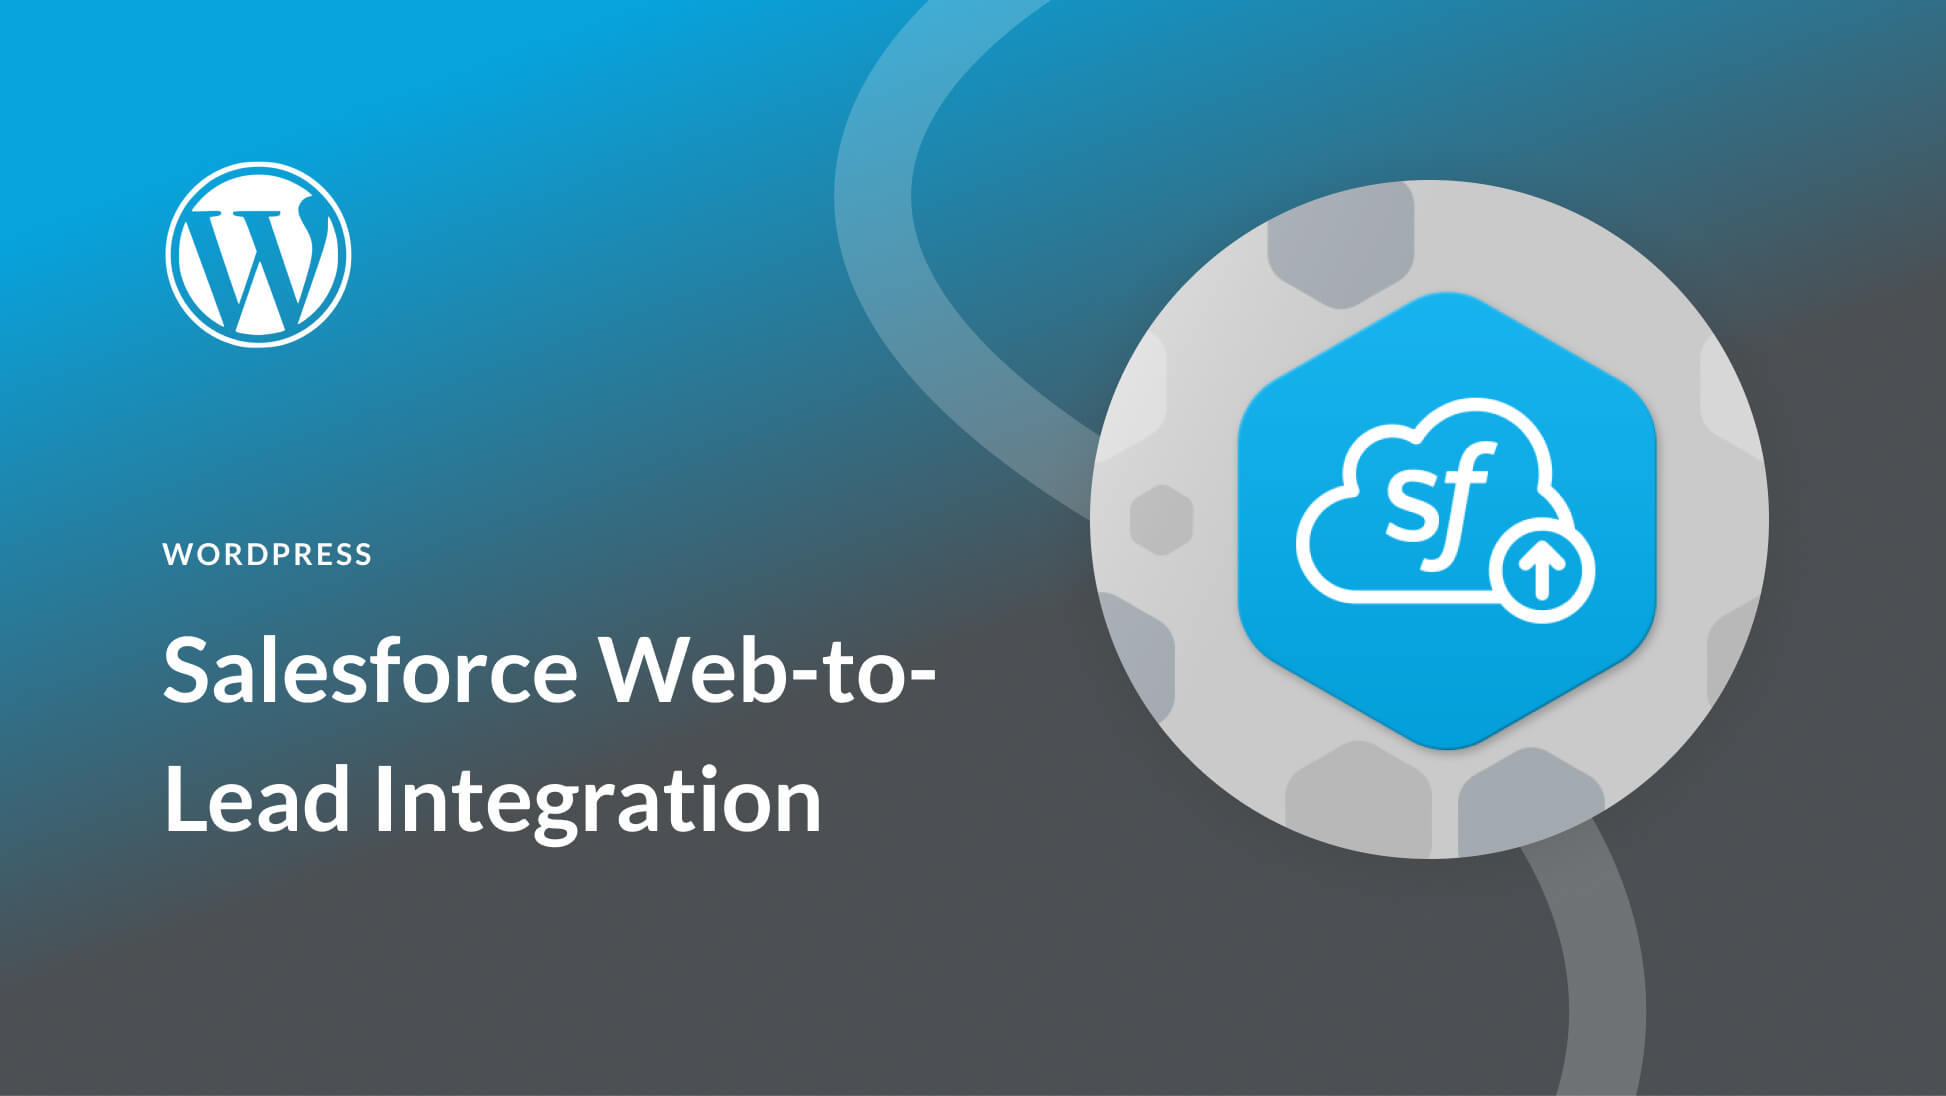 How to Integrate Salesforce Web-to-Lead with WordPress